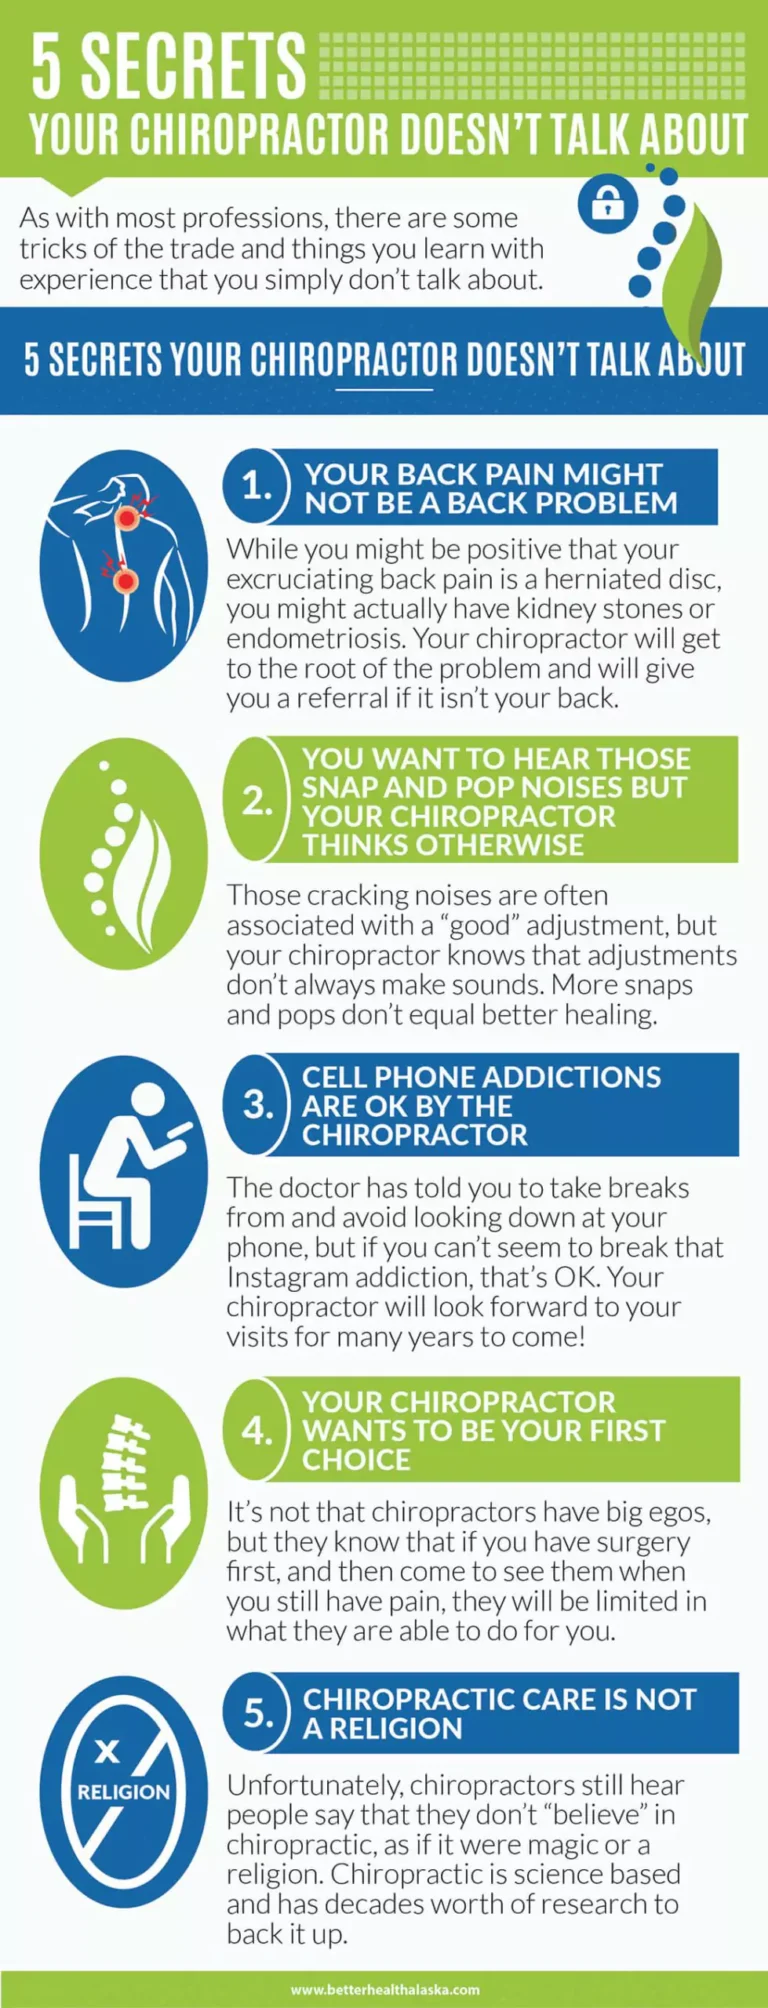 An infographic about the secrets a chiropractor doesn't talk about.